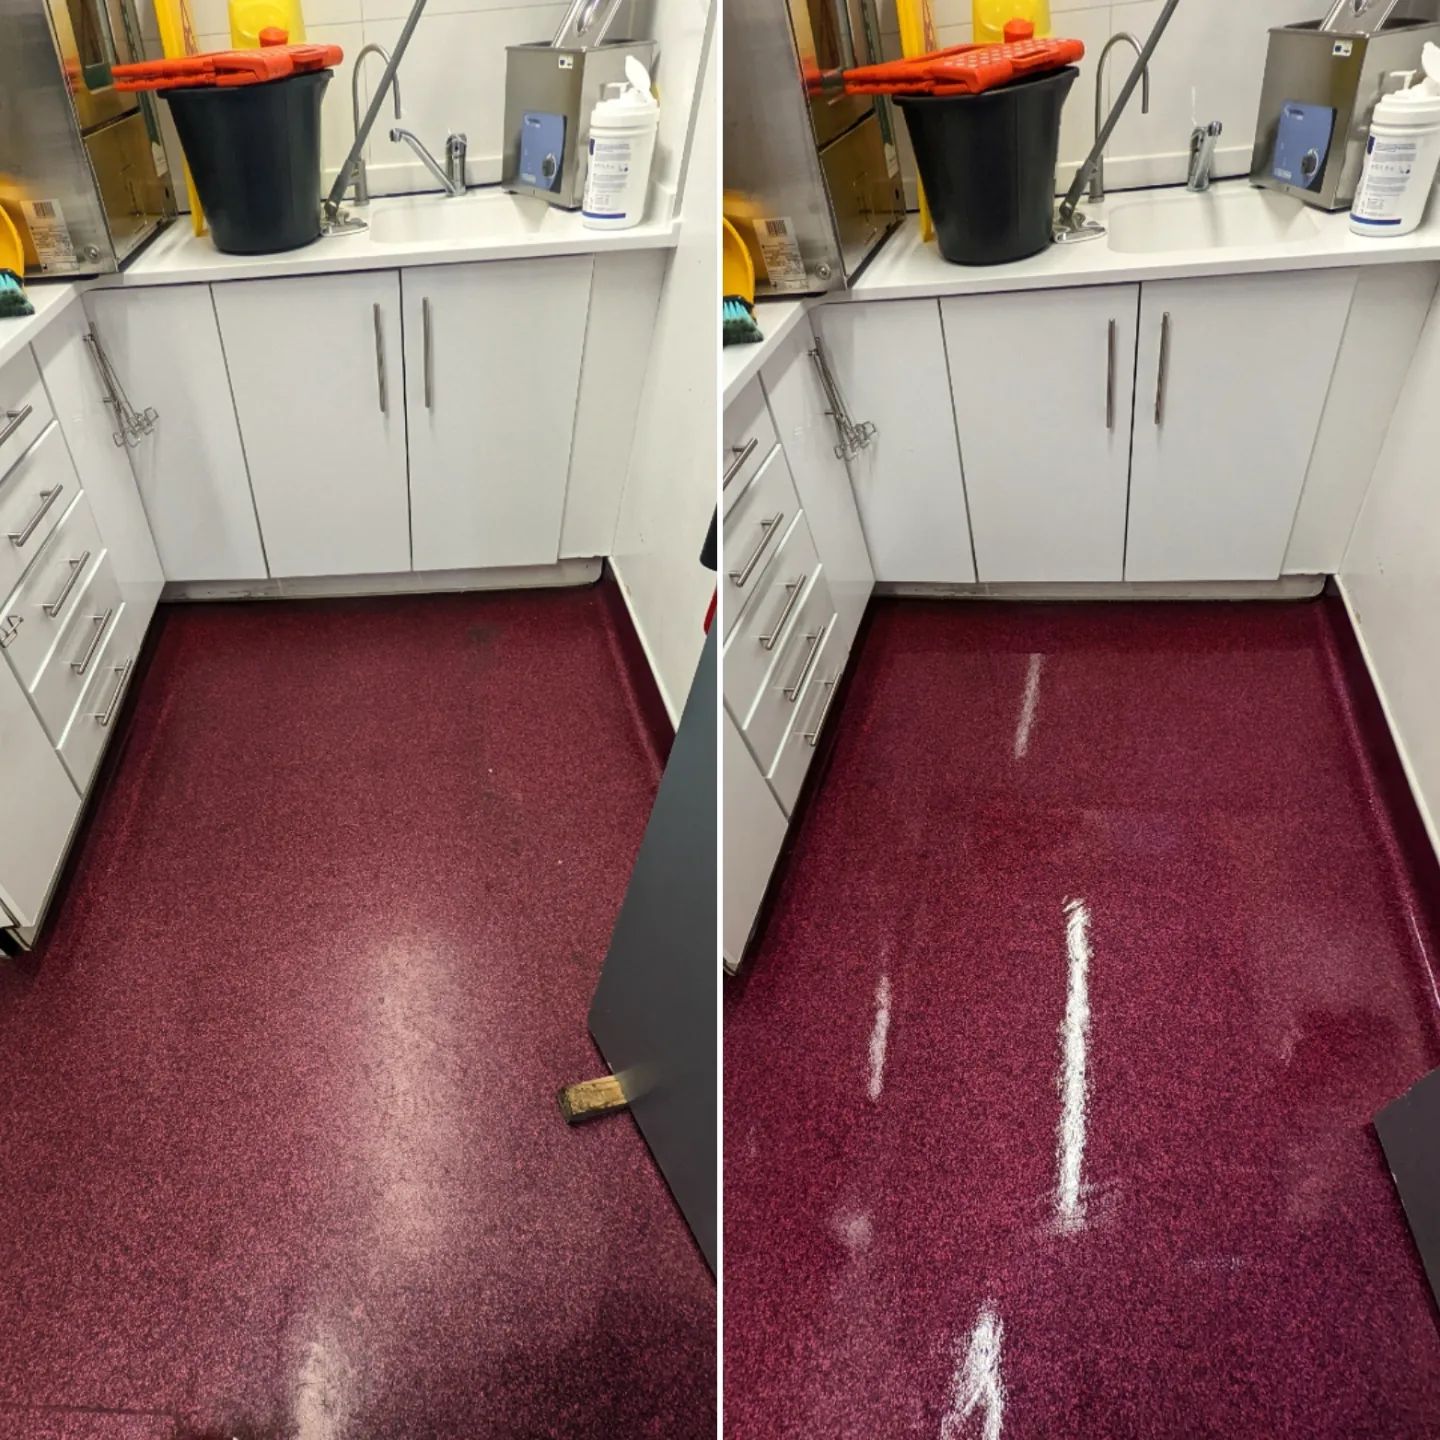 VINYL FLOOR DEEP CLEANING AND SEALING IN AN ORTHODONTIC CENTRE IN HEATON MERSEY, MANCHESTER